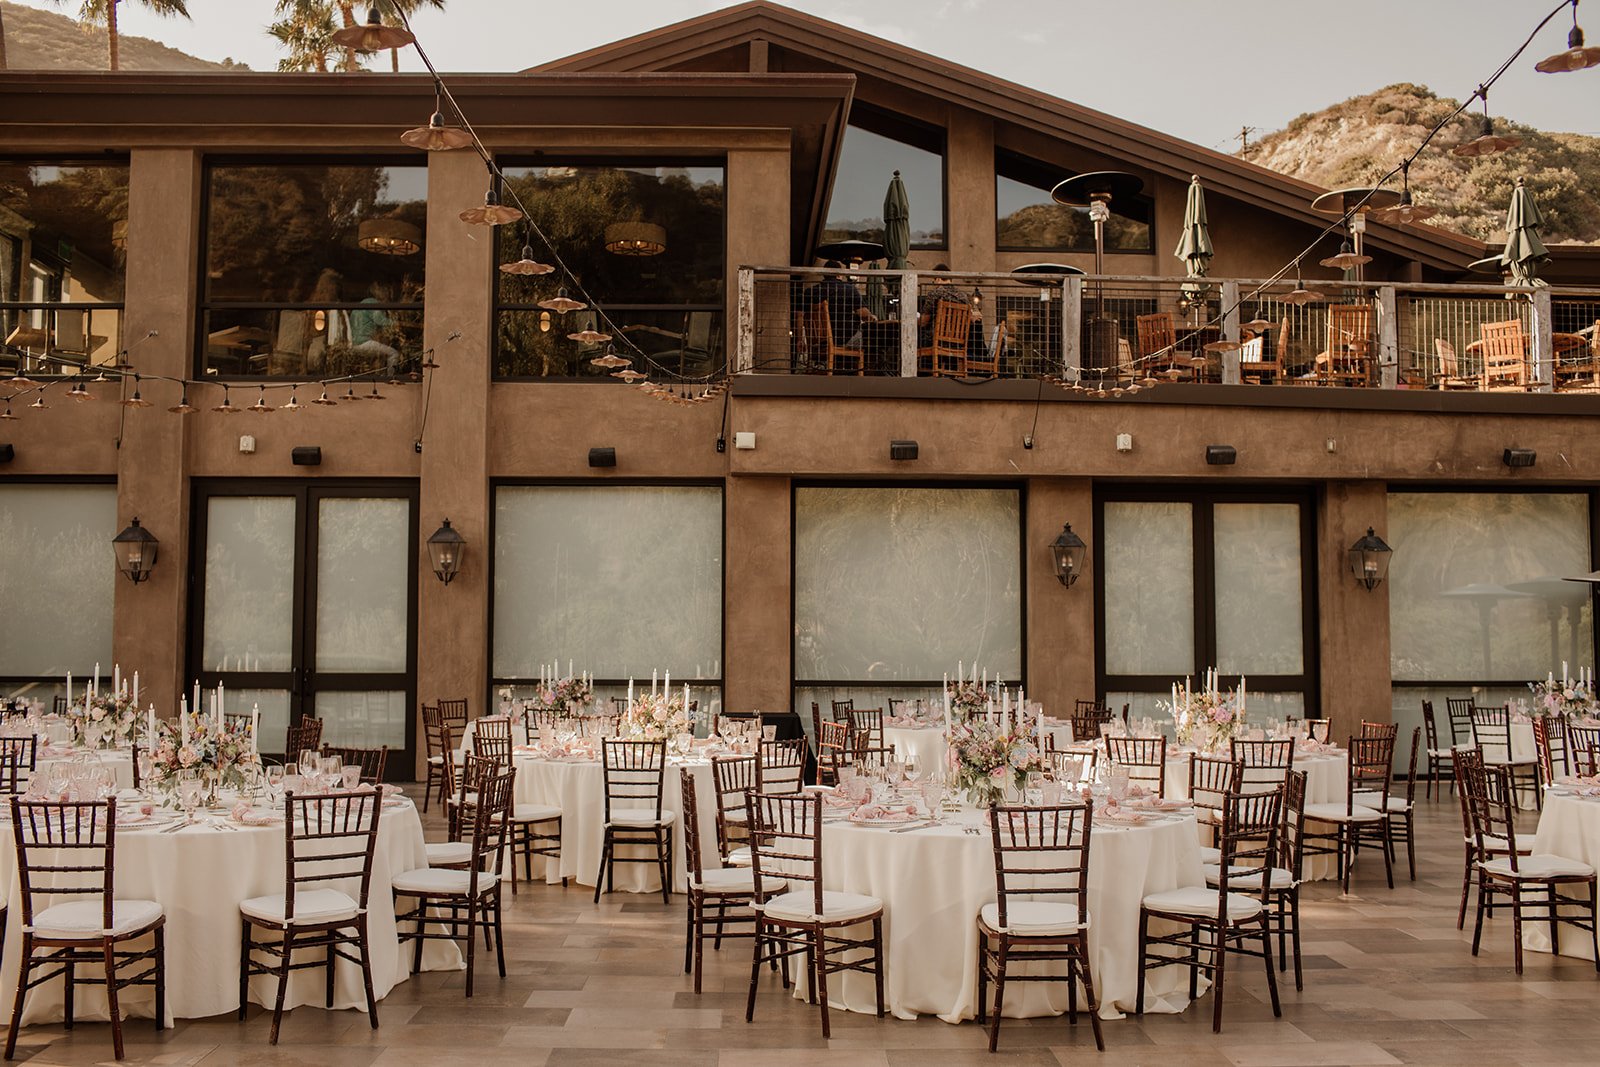 LA couple getting married at the ranch at laguna beach in southern california